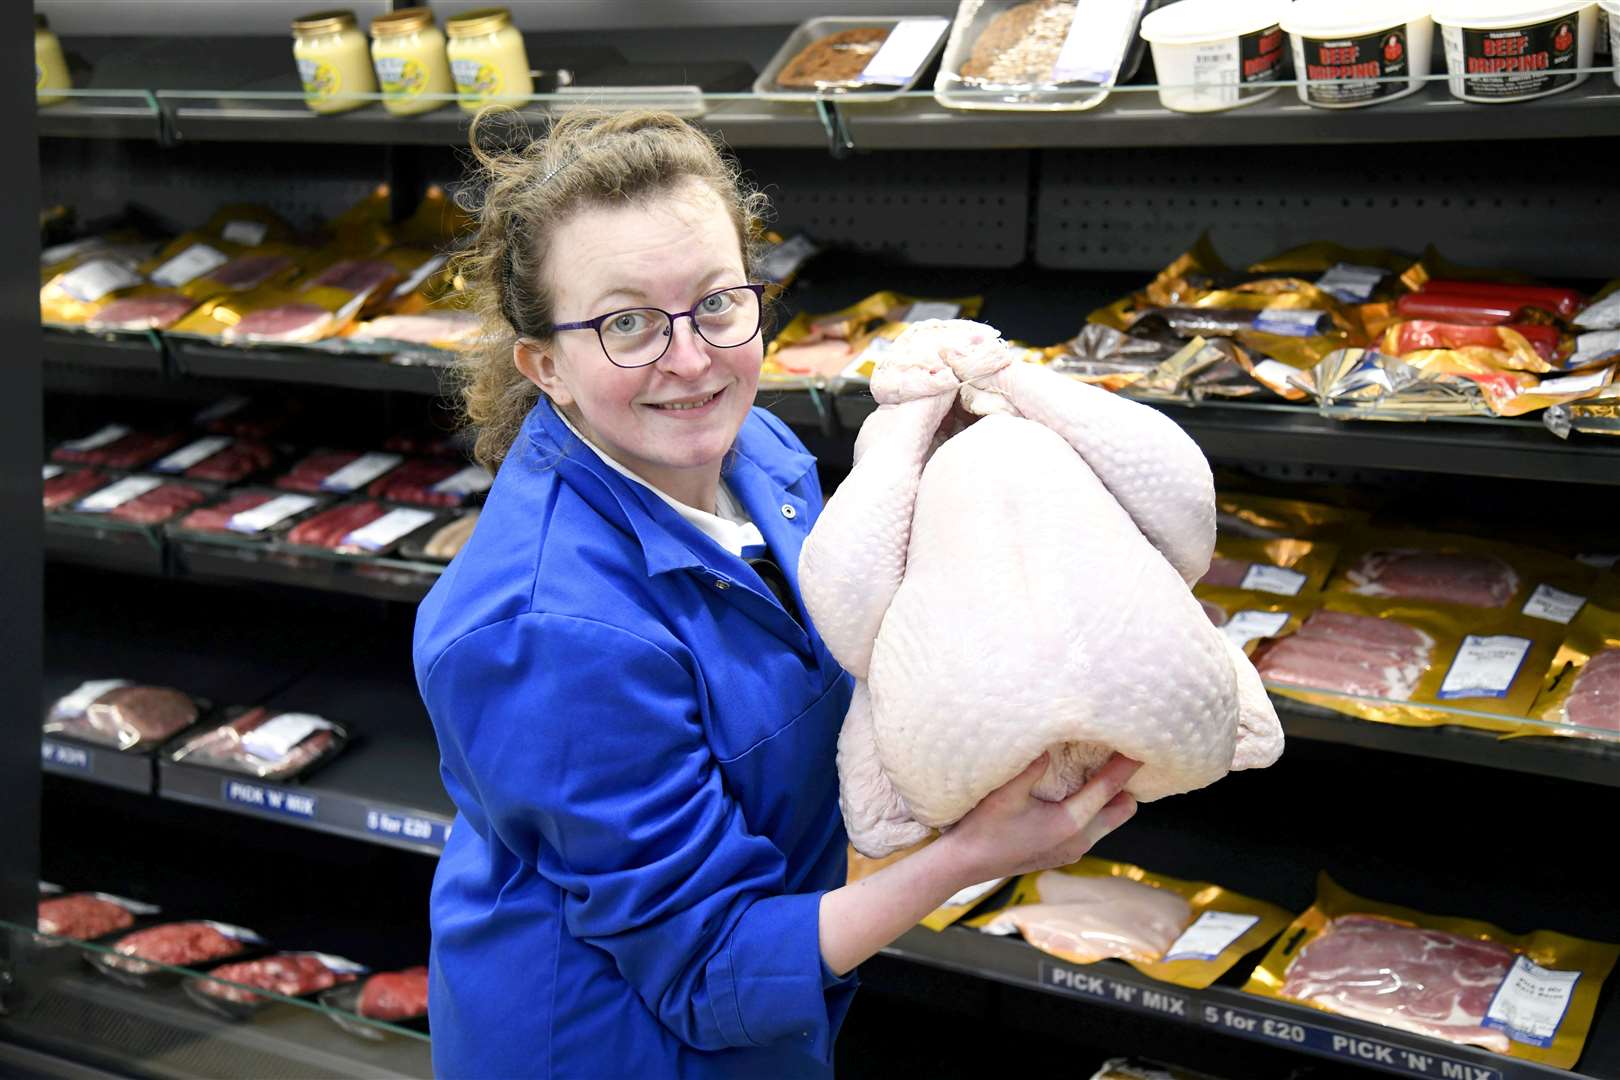 Rebekah Stott, who owns I.G Thomson butchers in Keith, has generously donated three turkeys to people in need for Christmas. Picture: Beth Taylor